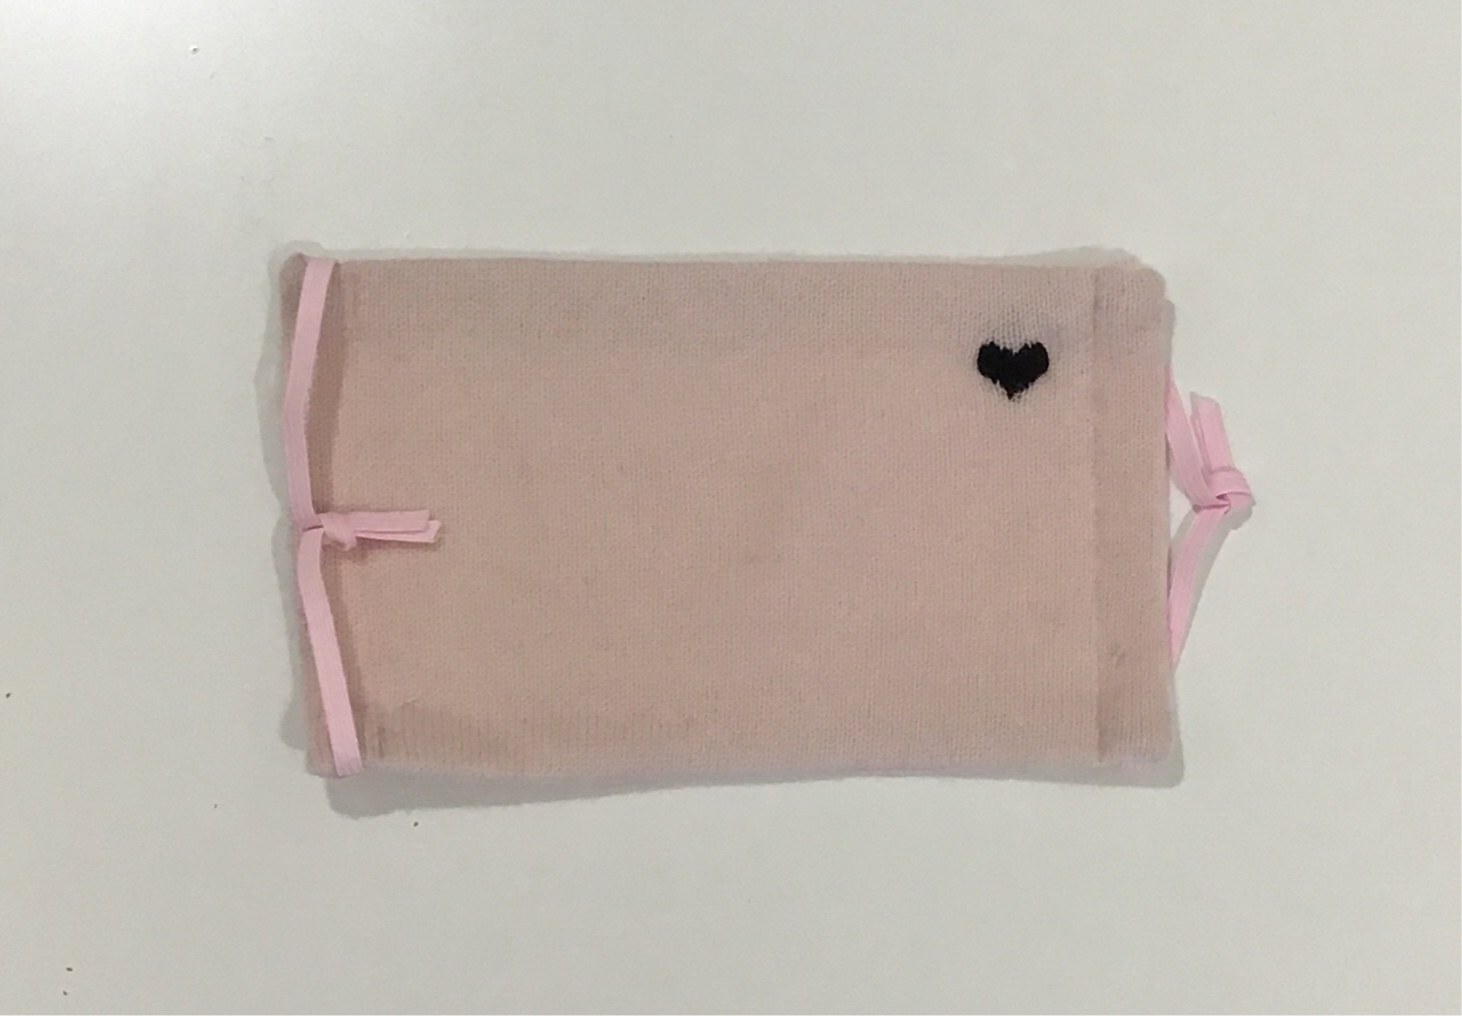 Cashmere Mask- Embroidered Heart- Pink with Black Heart